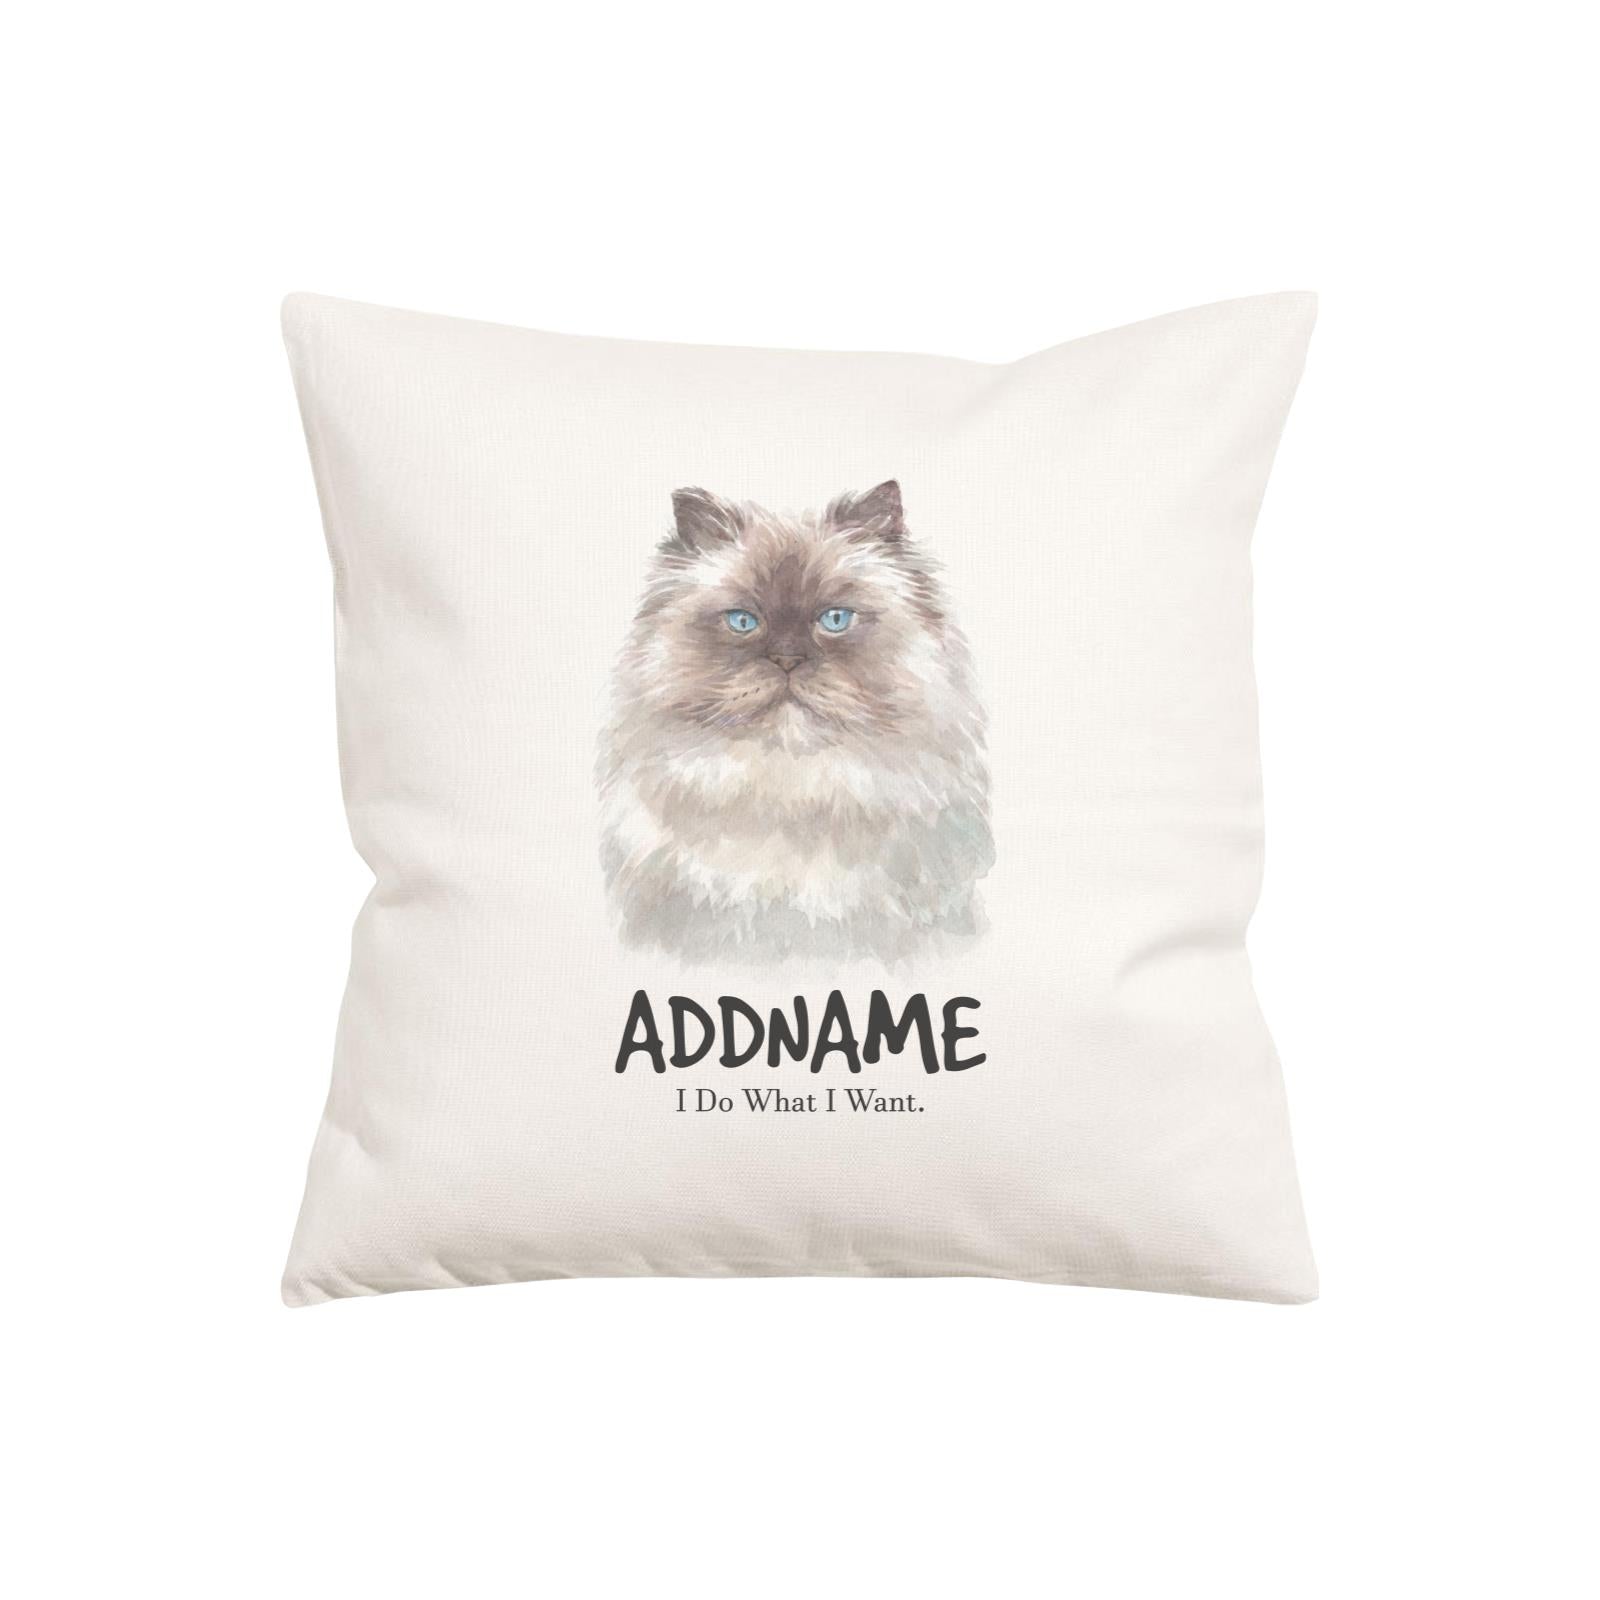 Watercolor Cat Series Himalayan Front Brown I Do What I Want Addname Pillow Cushion